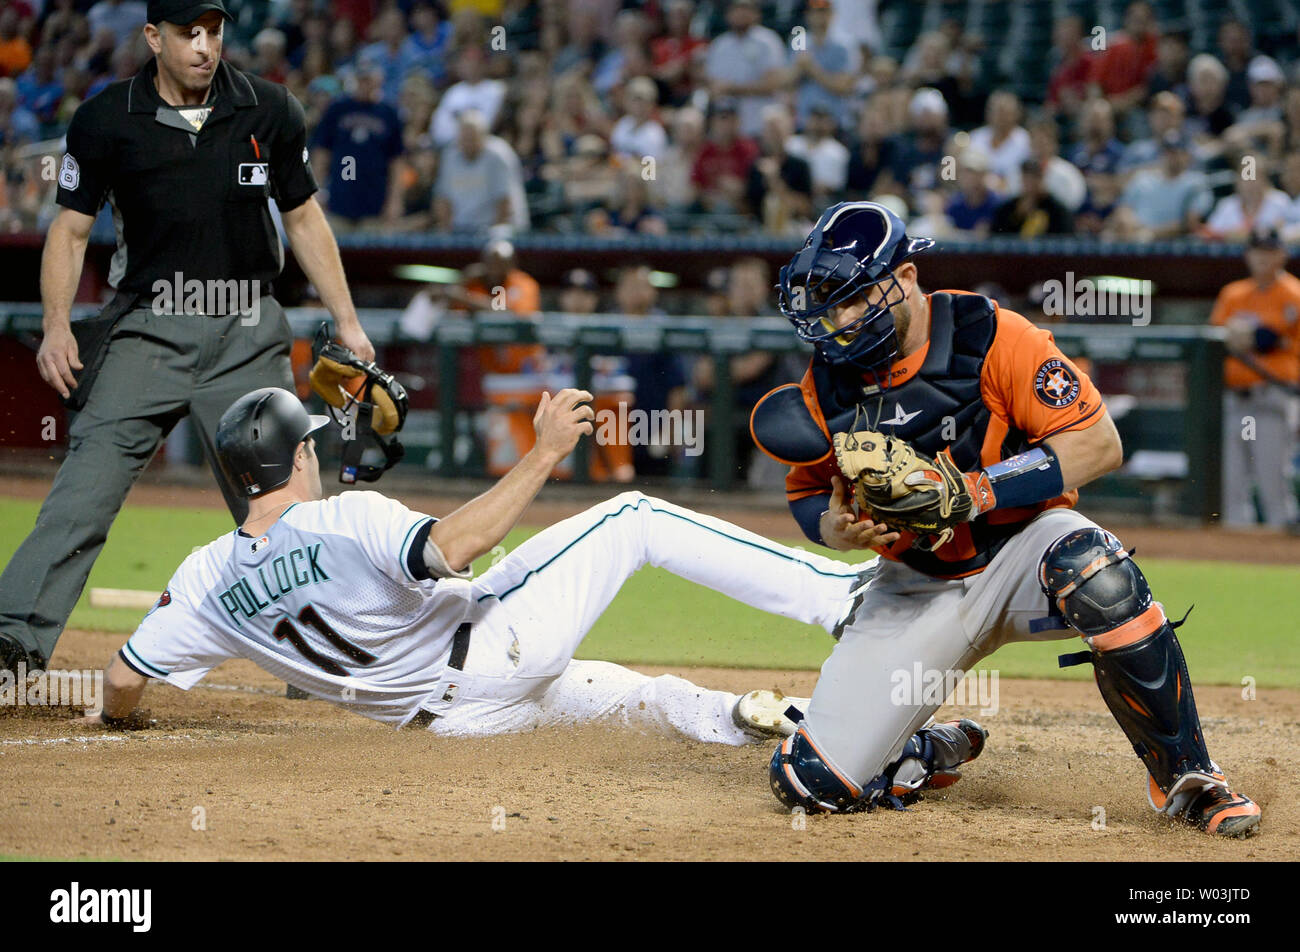 Arizona Diamondbacks' A. J. Pollock (C) slides in to home safely as Houston Astros' catcher Max Stassi fields the wide throw in the fourth inning at Chase Field in Phoenix, Arizona, August 15, 2017. Watching the play is home plate umpire Chris Guccione. The Astros defeated the Diamondbacks 9-4.     Photo by Art Foxall/UPI Stock Photo